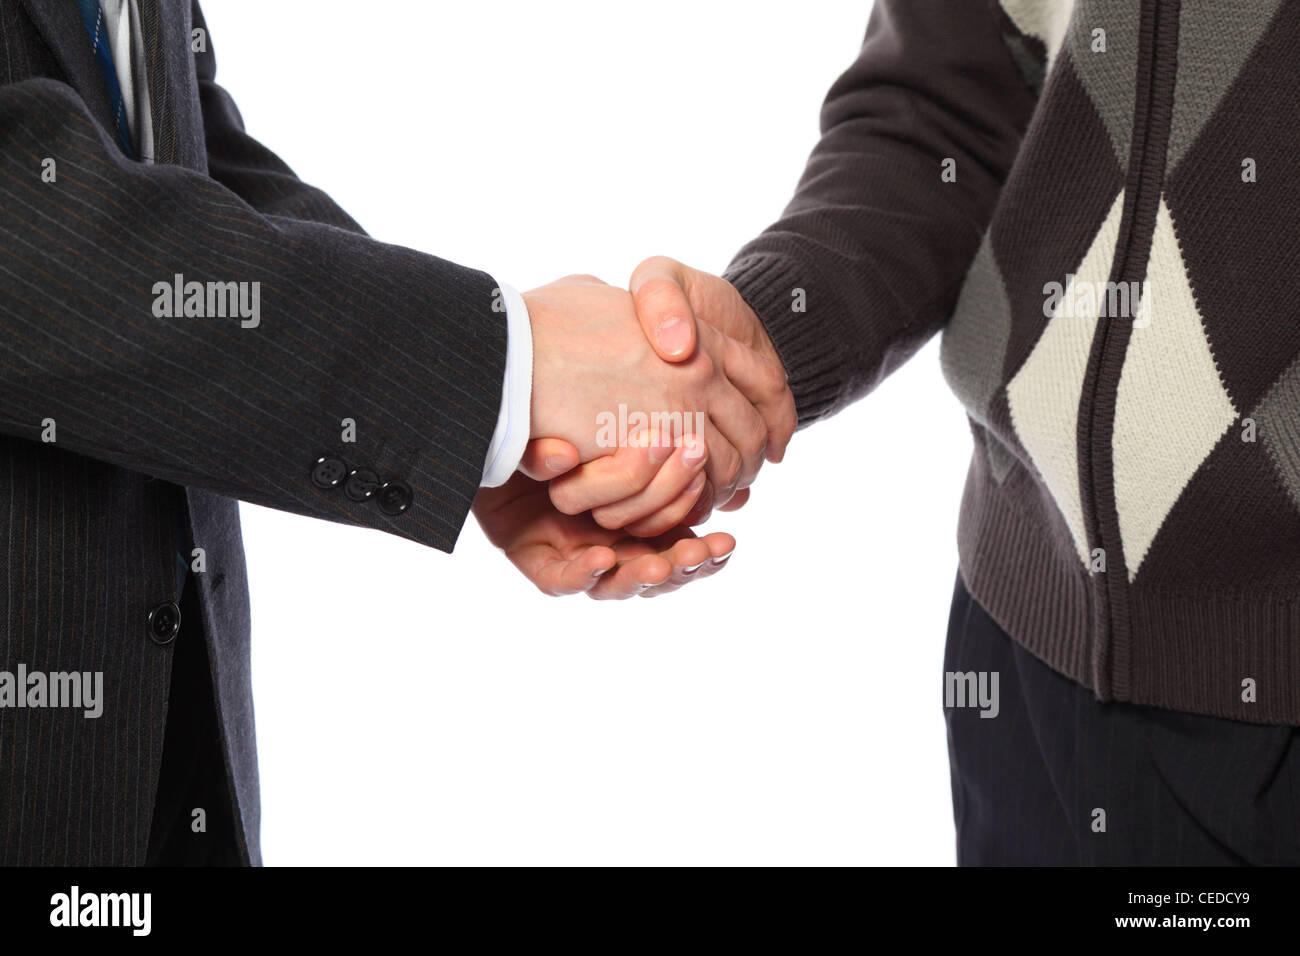 Handshake of two businessmen, suit and sweater Stock Photo